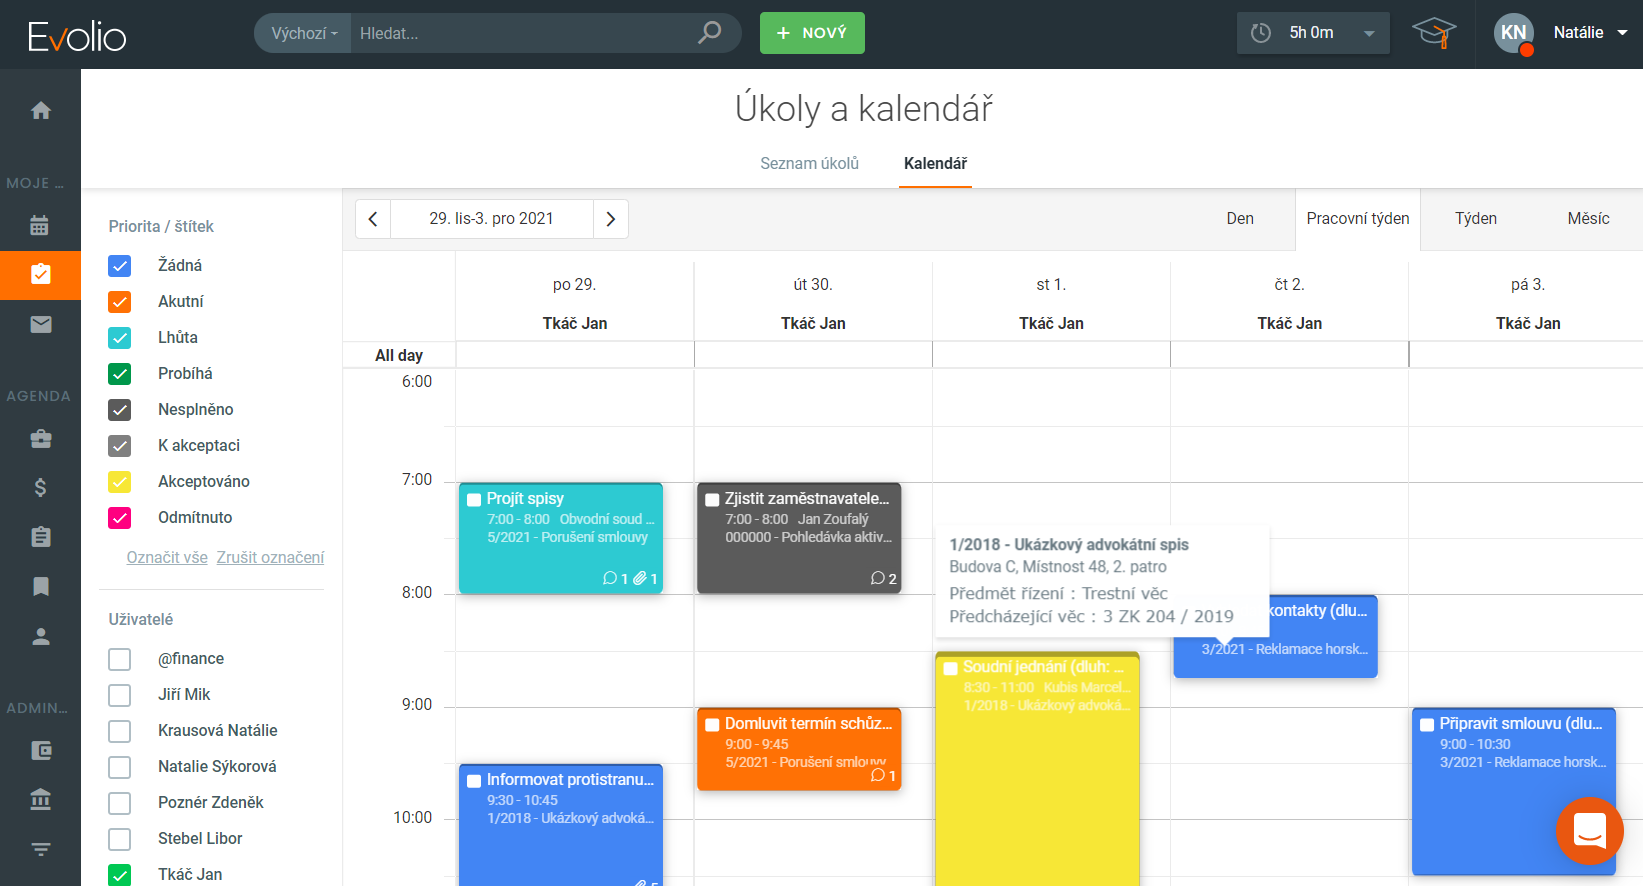 Planning calendar with lawyer meetings